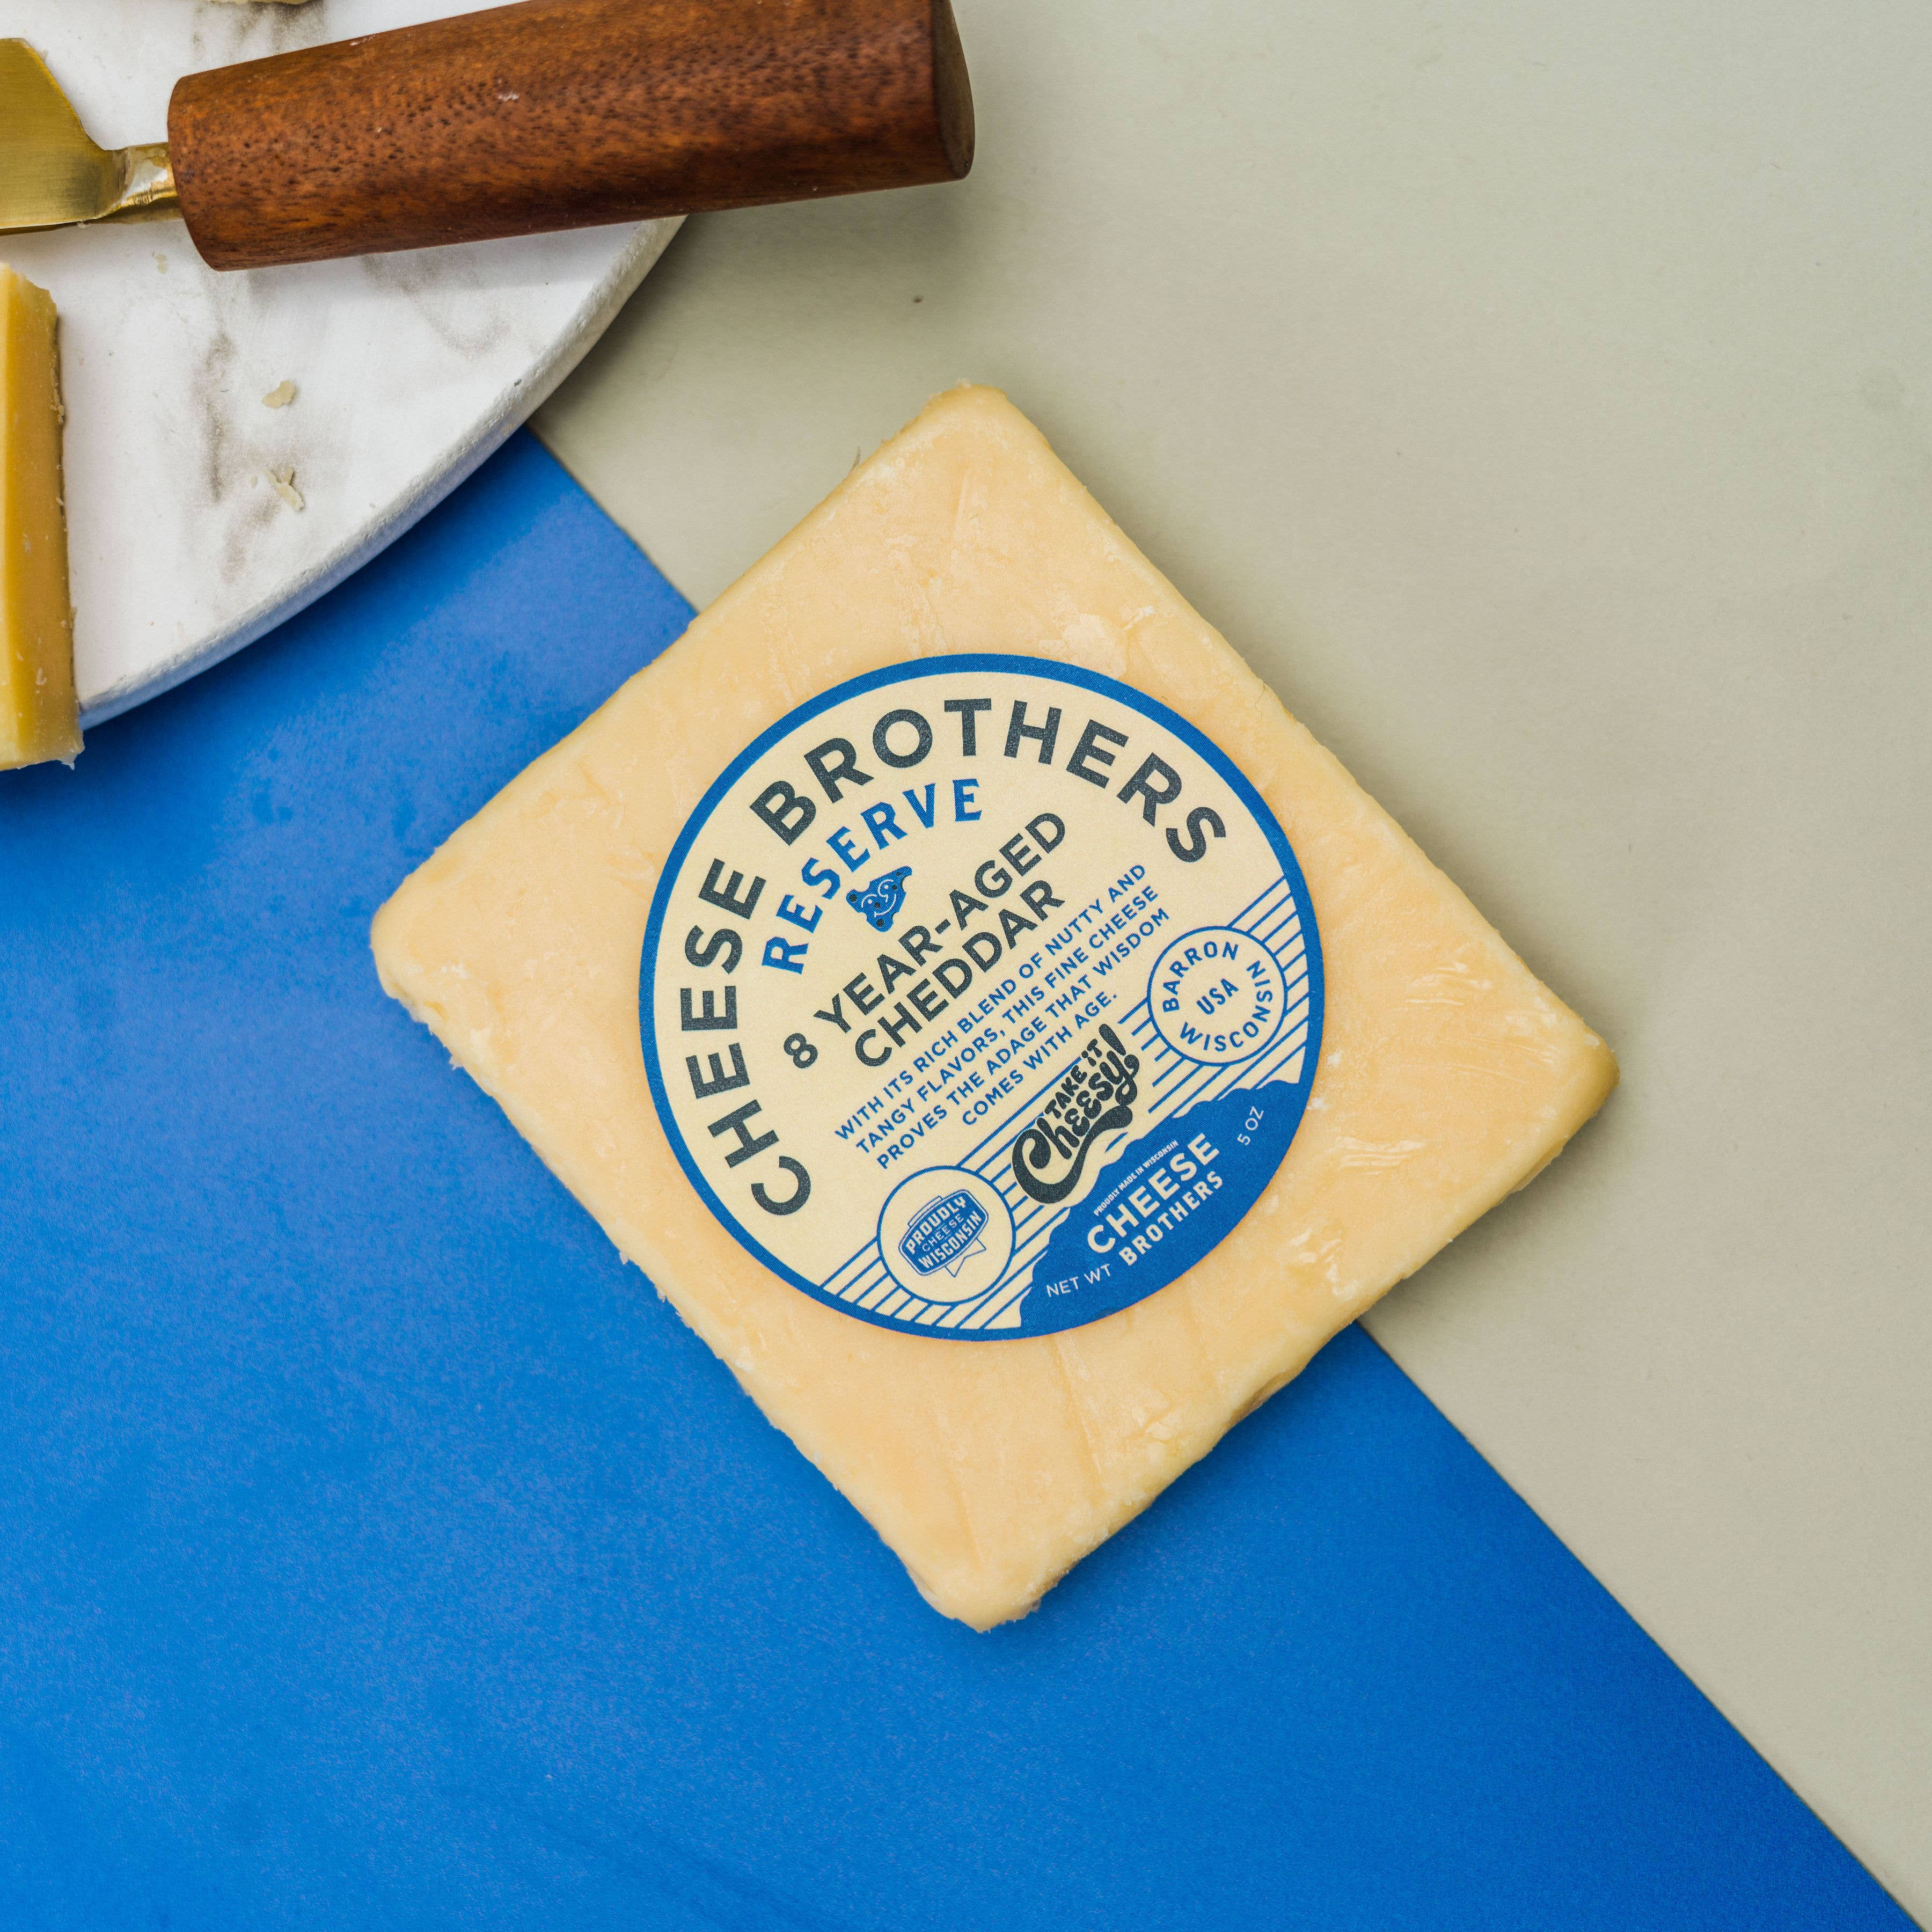 Cheese Wax for Preservation & Aging: Artisanal Supplies